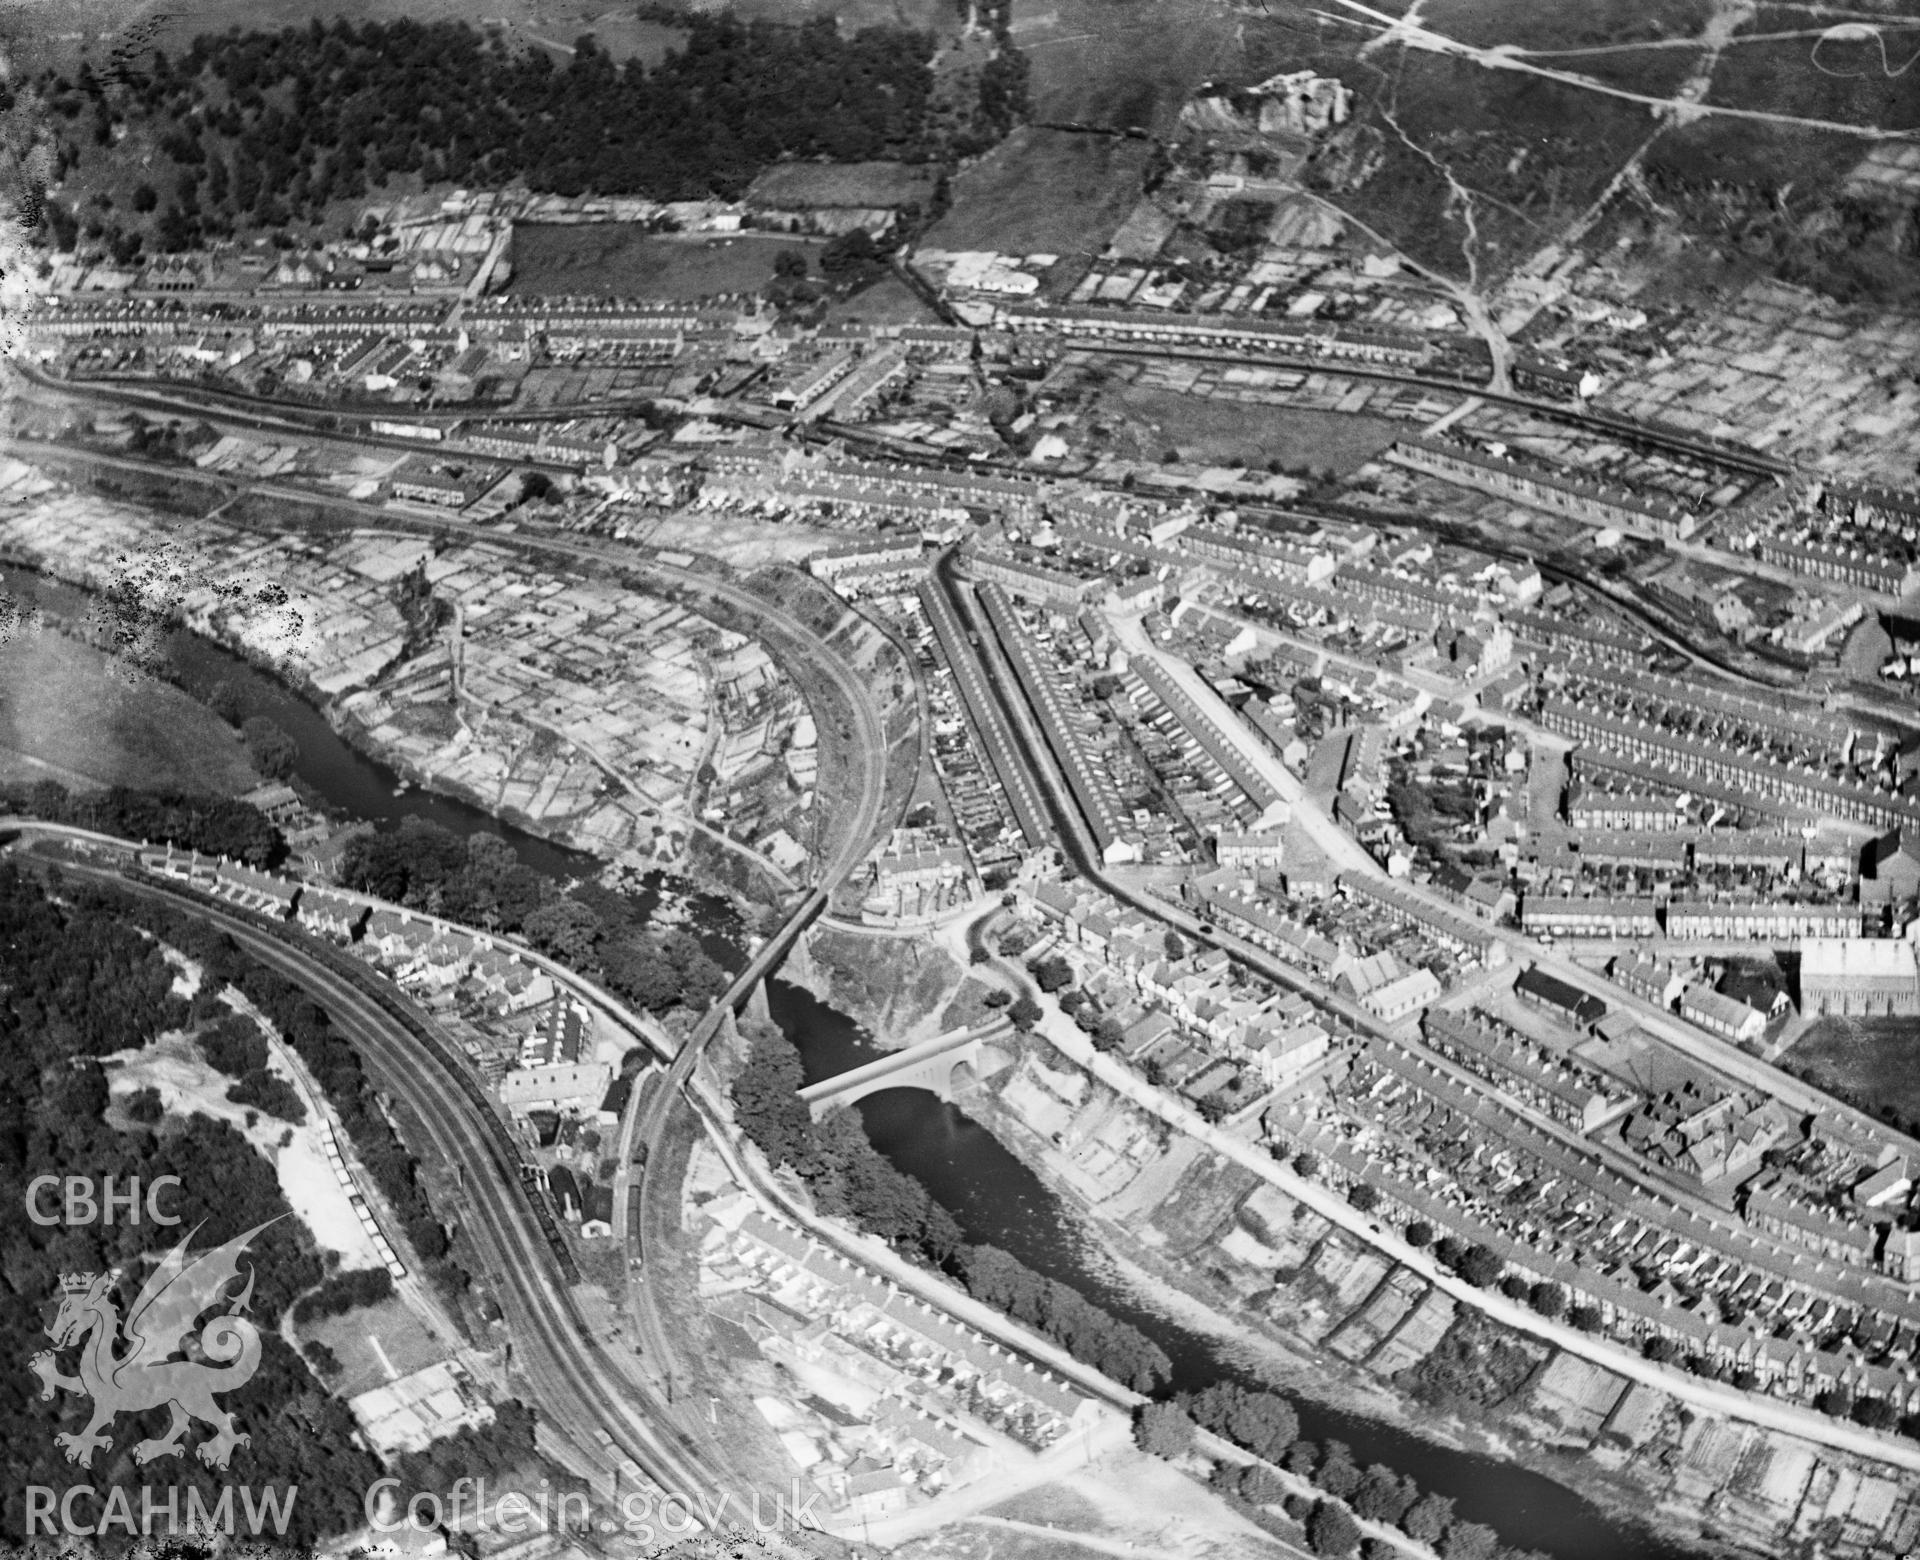 General view of Pontypridd, oblique aerial view. 5?x4? black and white glass plate negative.